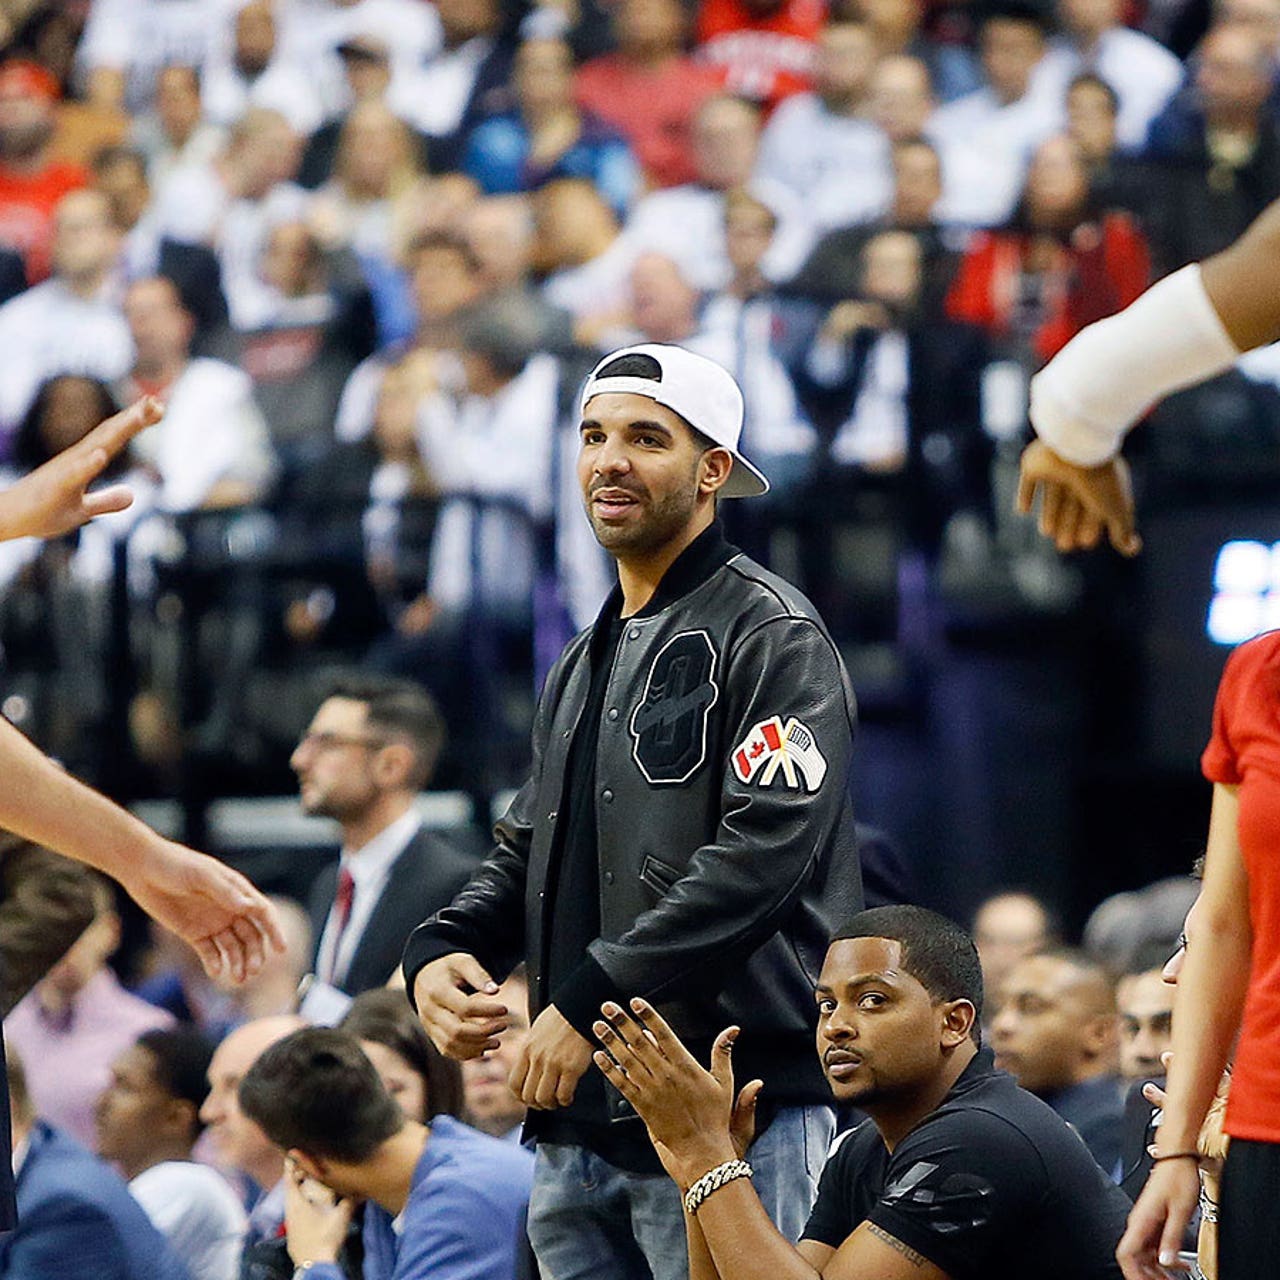 From A Collector to Courtside: How Drake Got His Curry Jersey